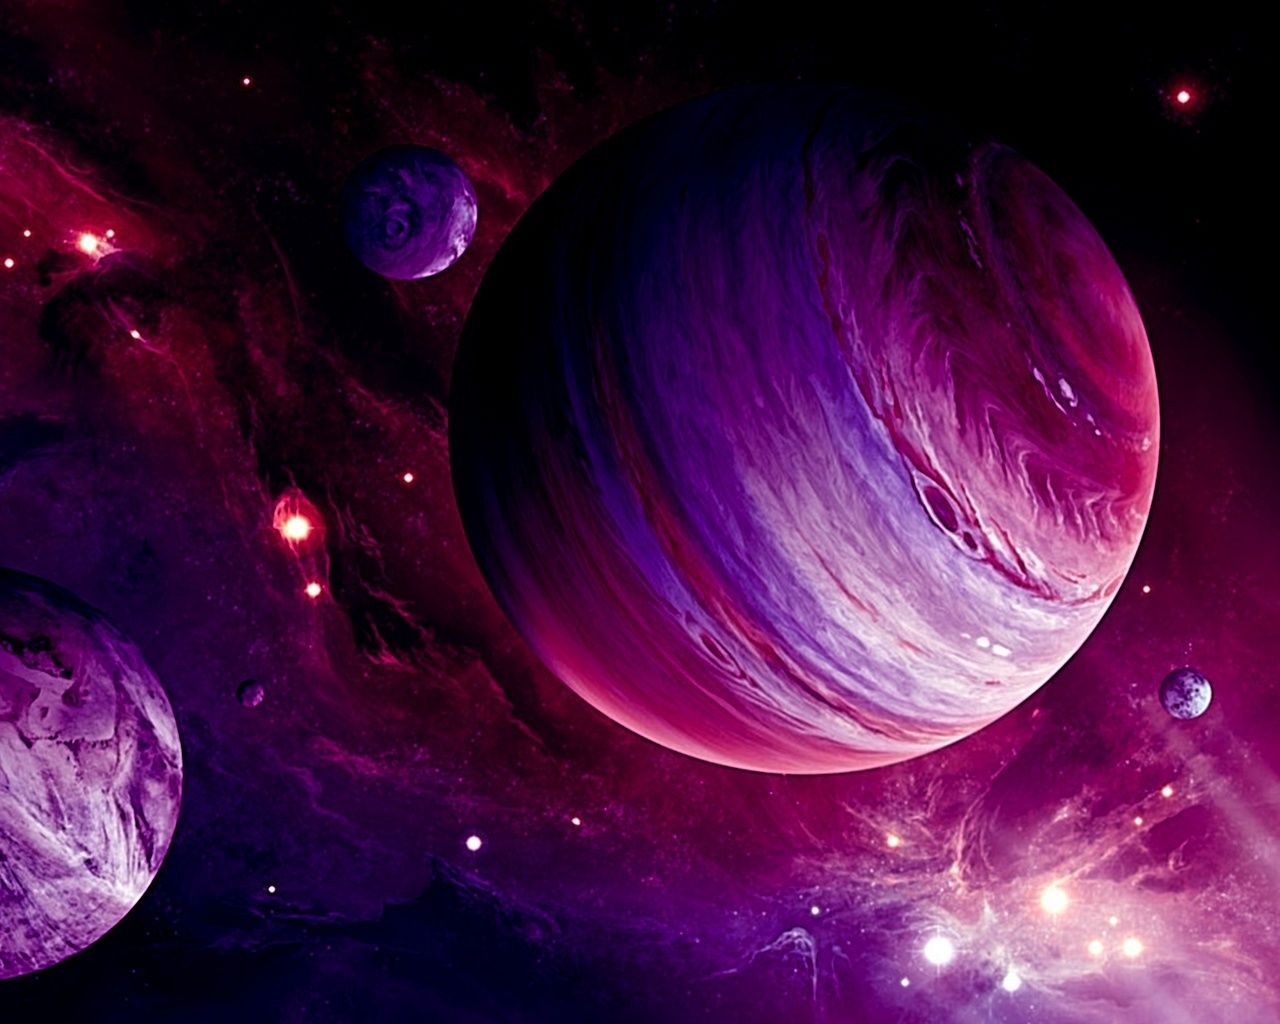 Pink (Color) Wallpaper: Space.the Pink frontier. Wallpaper background, Outer space wallpaper, Pink universe wallpaper